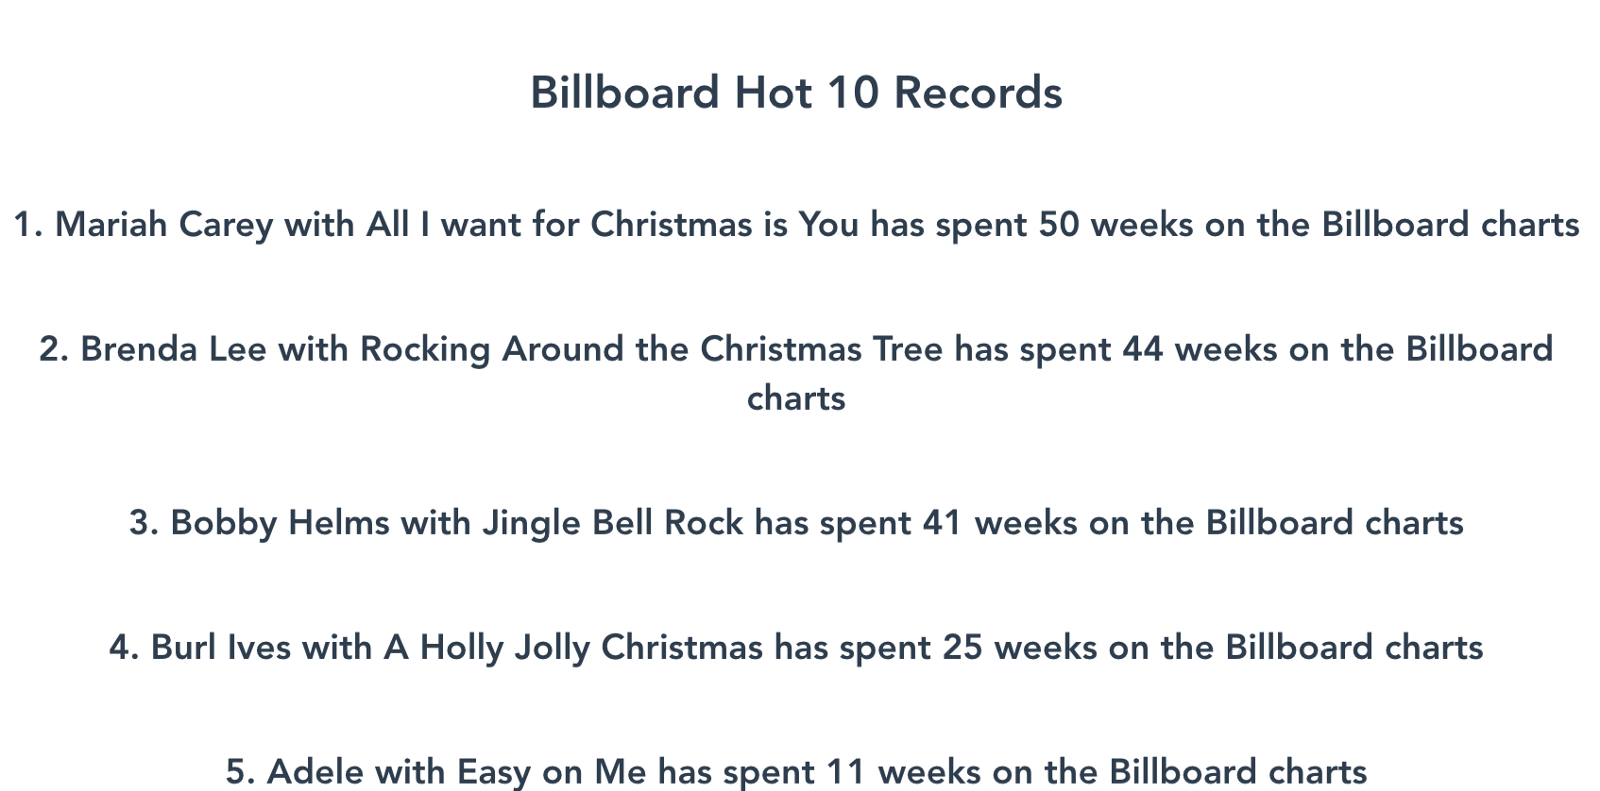 billboard-hot-10 records - 1. Mariah Carey with All I want for Christmas is you has spent 50 weeks on the Billboard charts. 2. Brenda Lee with Rocking Around the Christmas Tree has spent 44 weeks… etc.